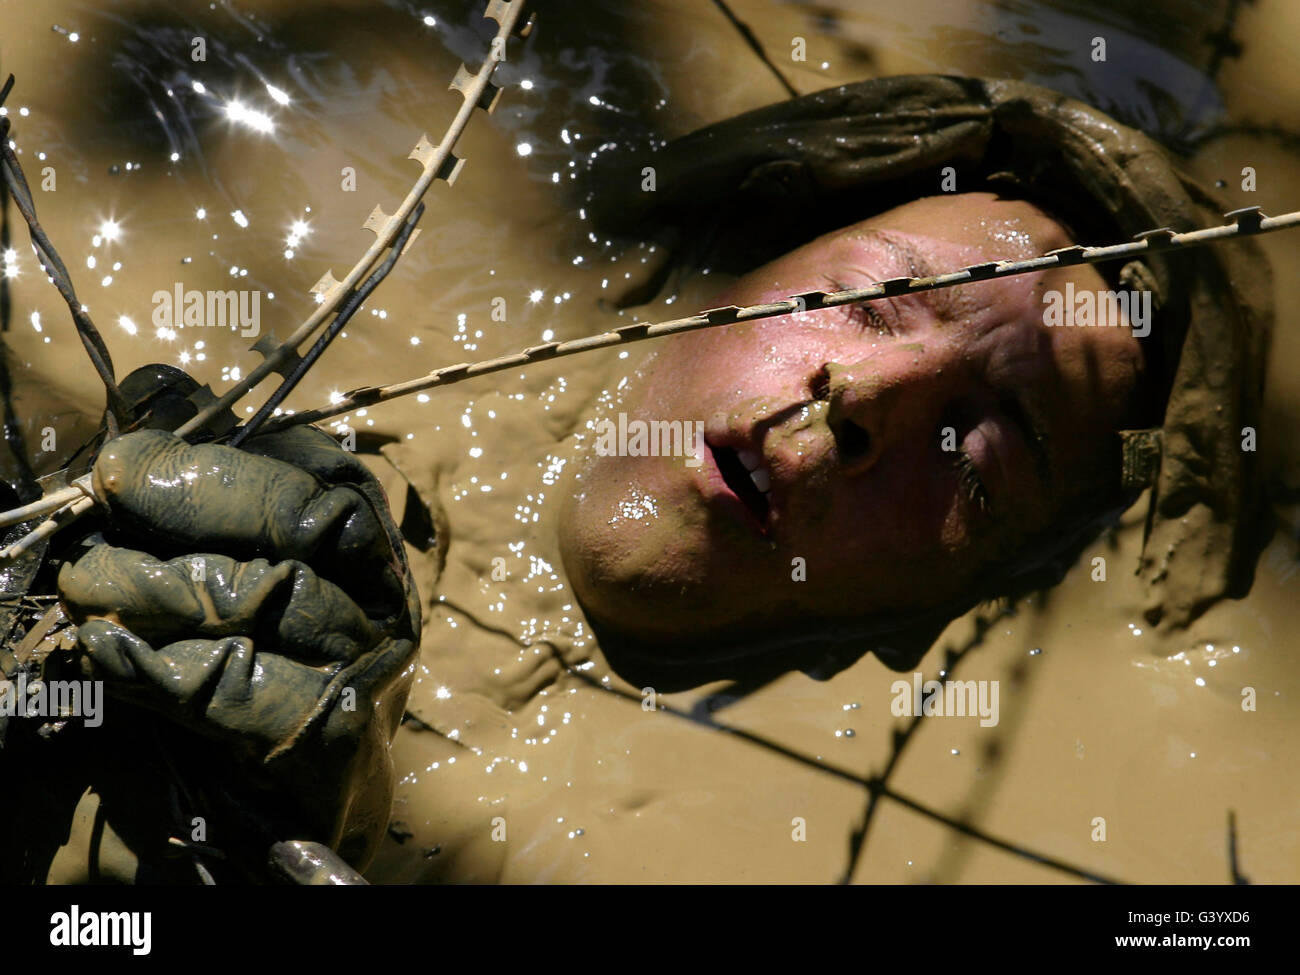 A soldier back crawls through a pit covered in concertina wire. Stock Photo